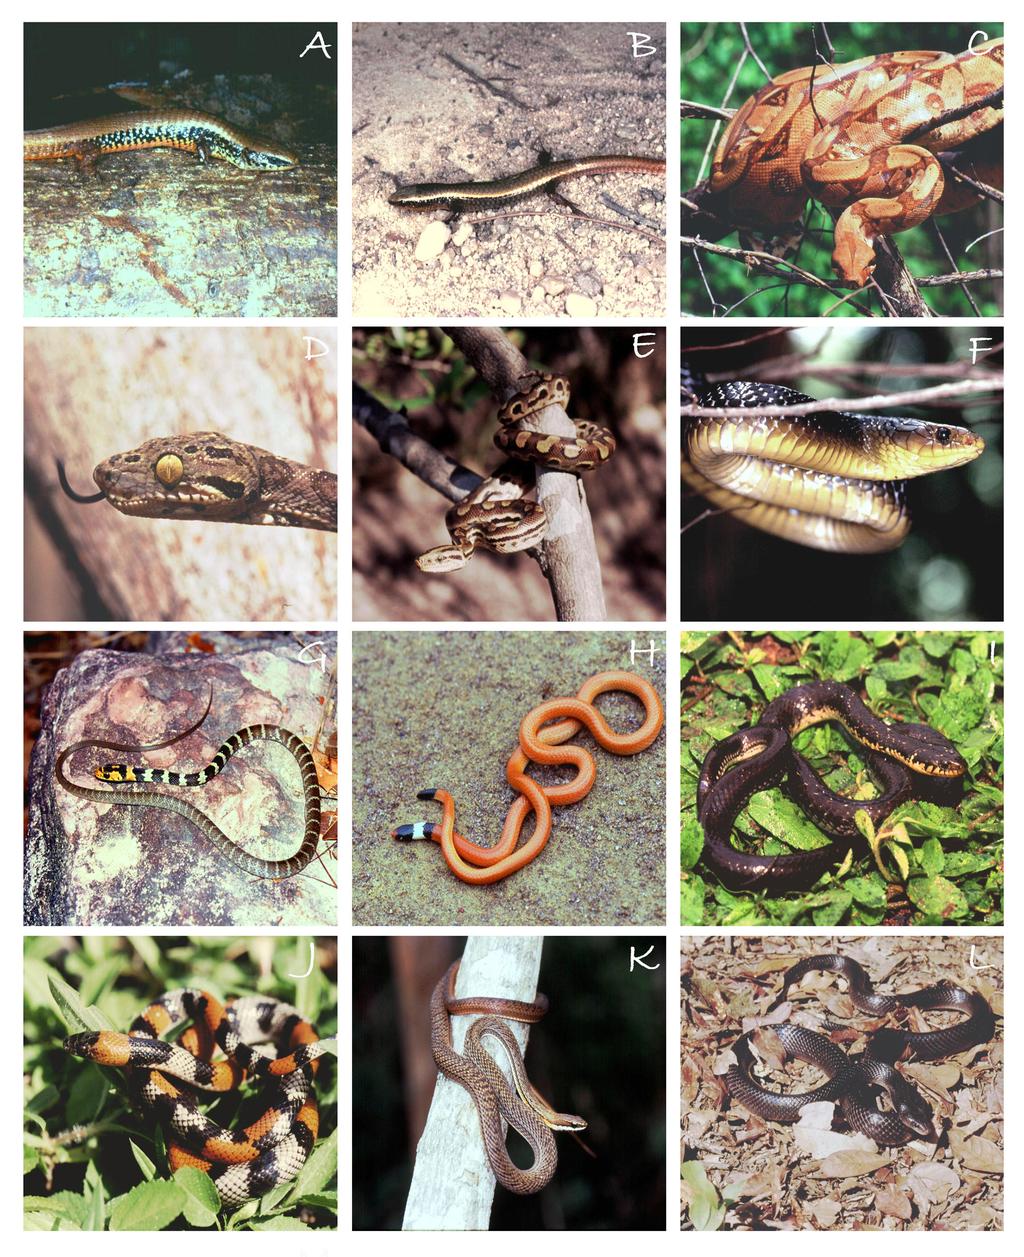 8 Dal Vechio, F. et al. Figure 5. Some of the reptile sampled at PNSCo.